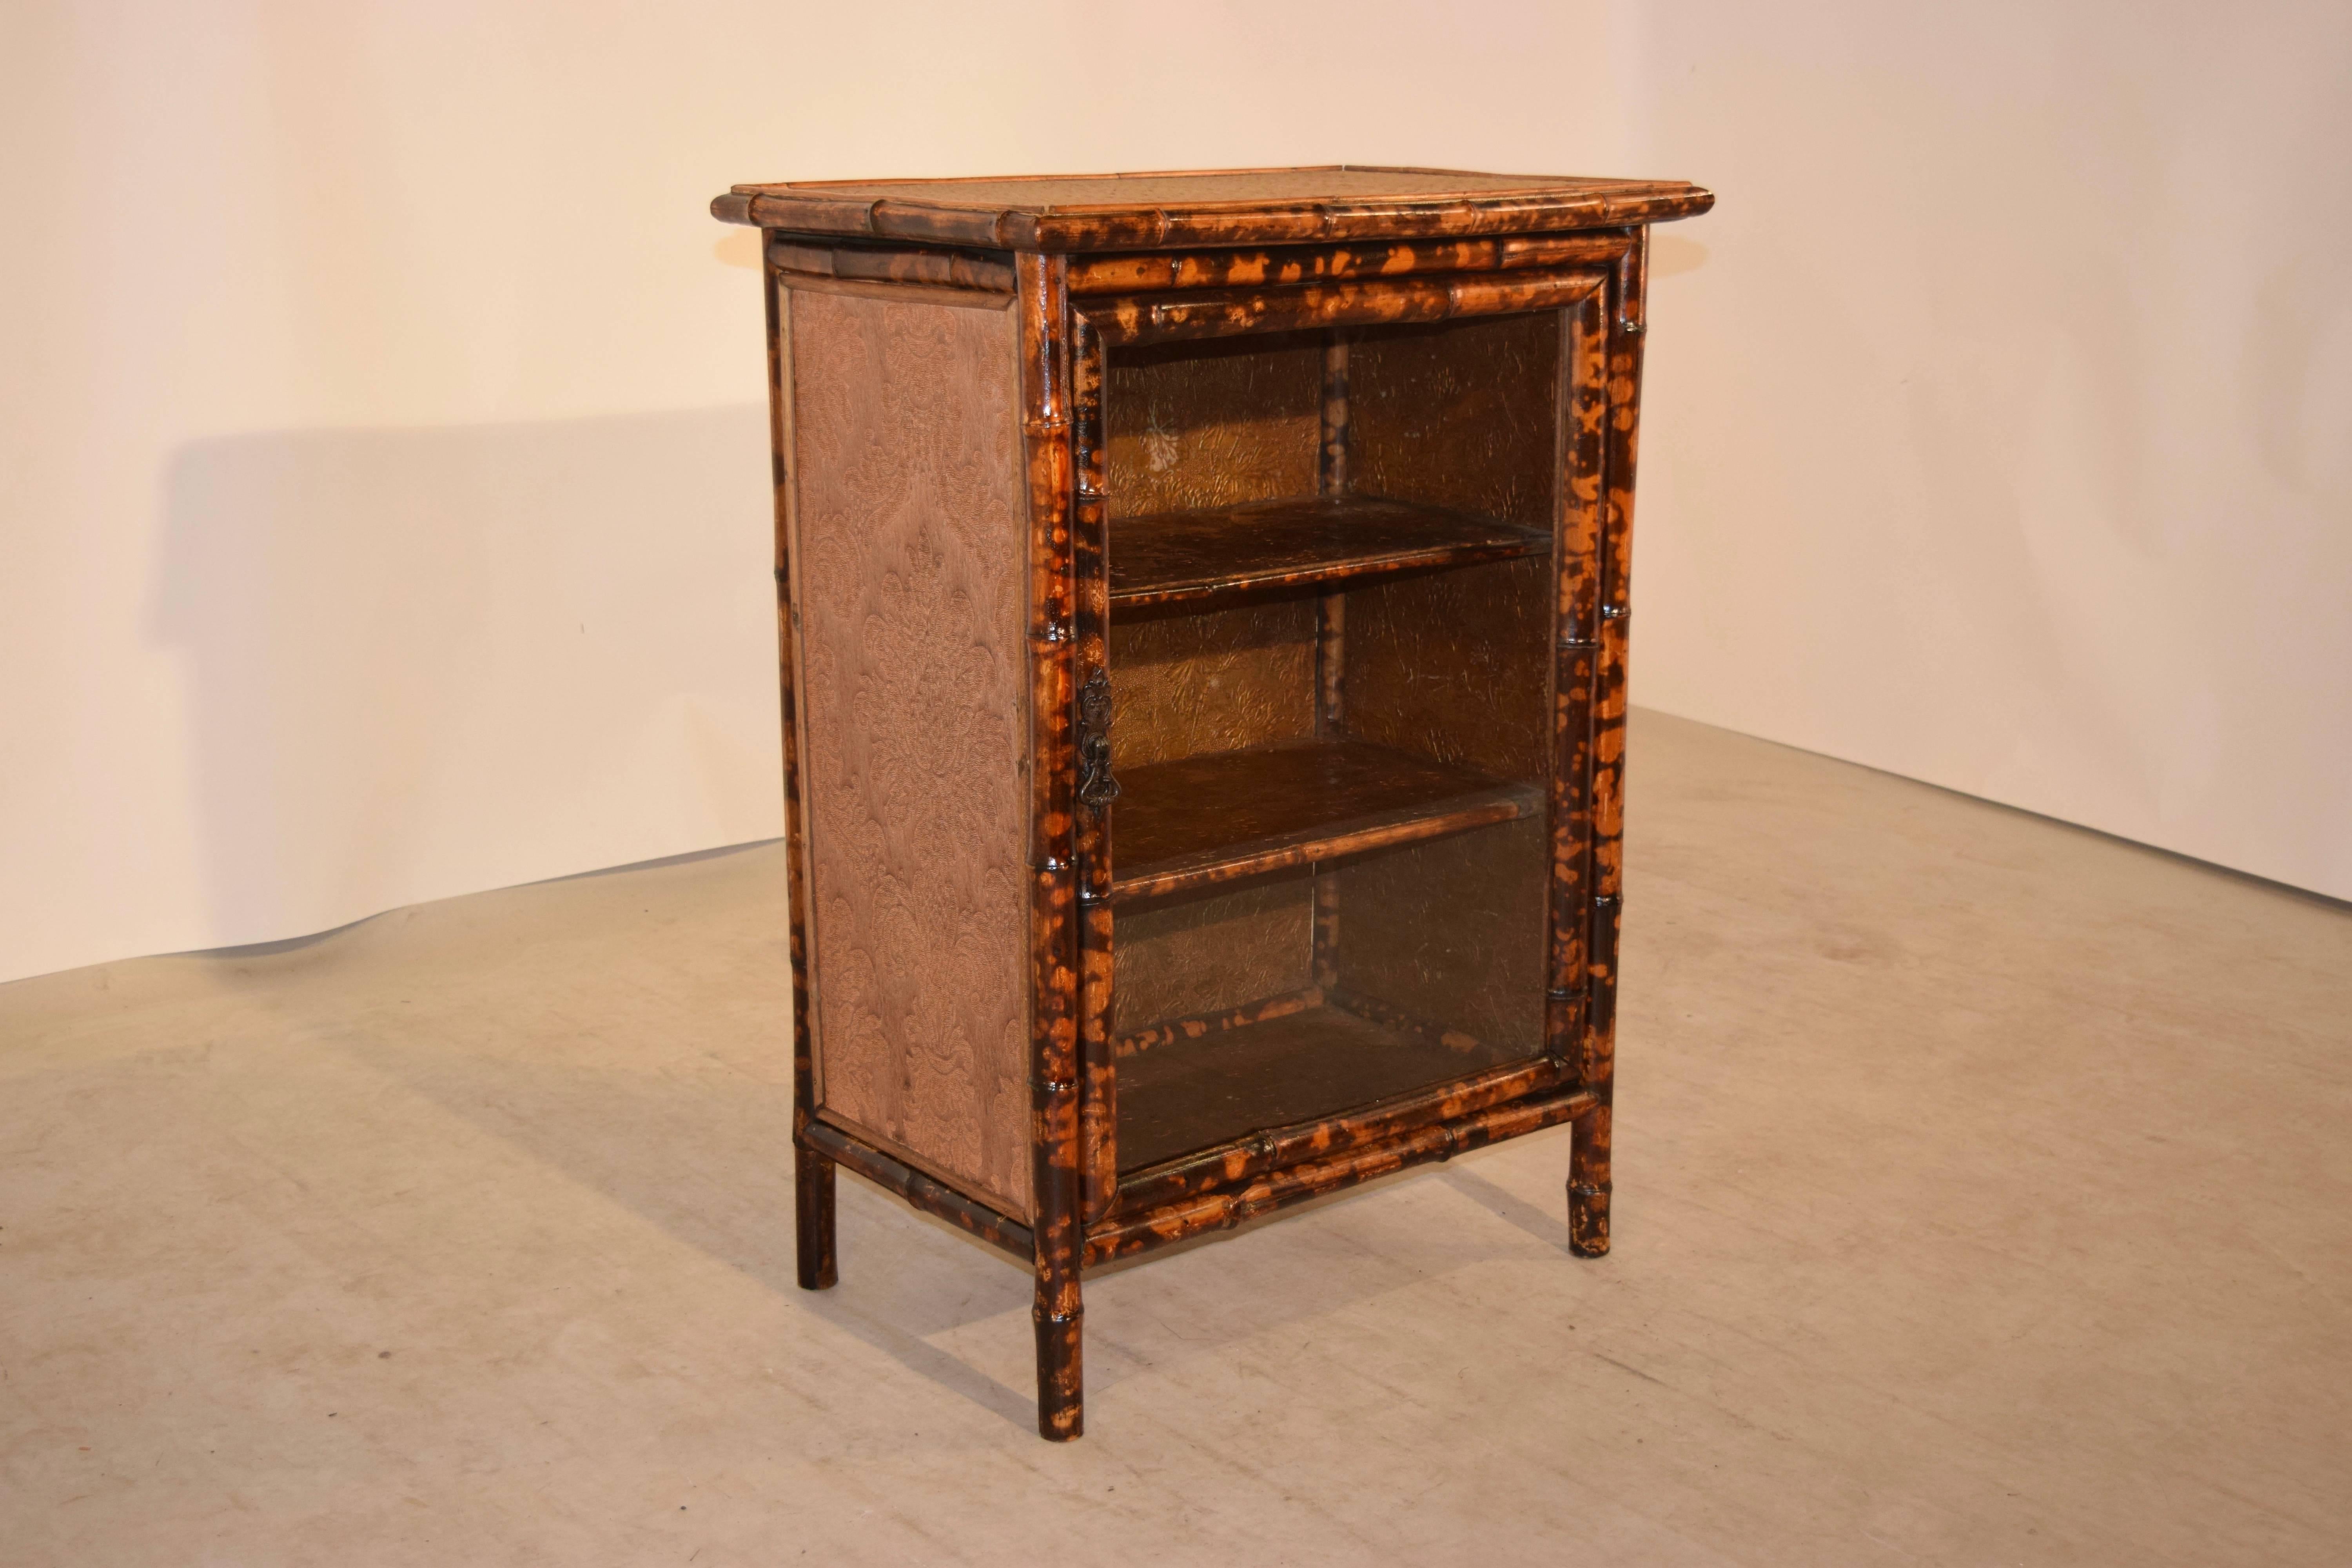 19th century bamboo bookcase from France with a rush covered top and fabric covered sides. There is a single glass door in the front, which opens to reveal three shelves, which are all covered in hand painted wallpaper, which gives it a fabulous